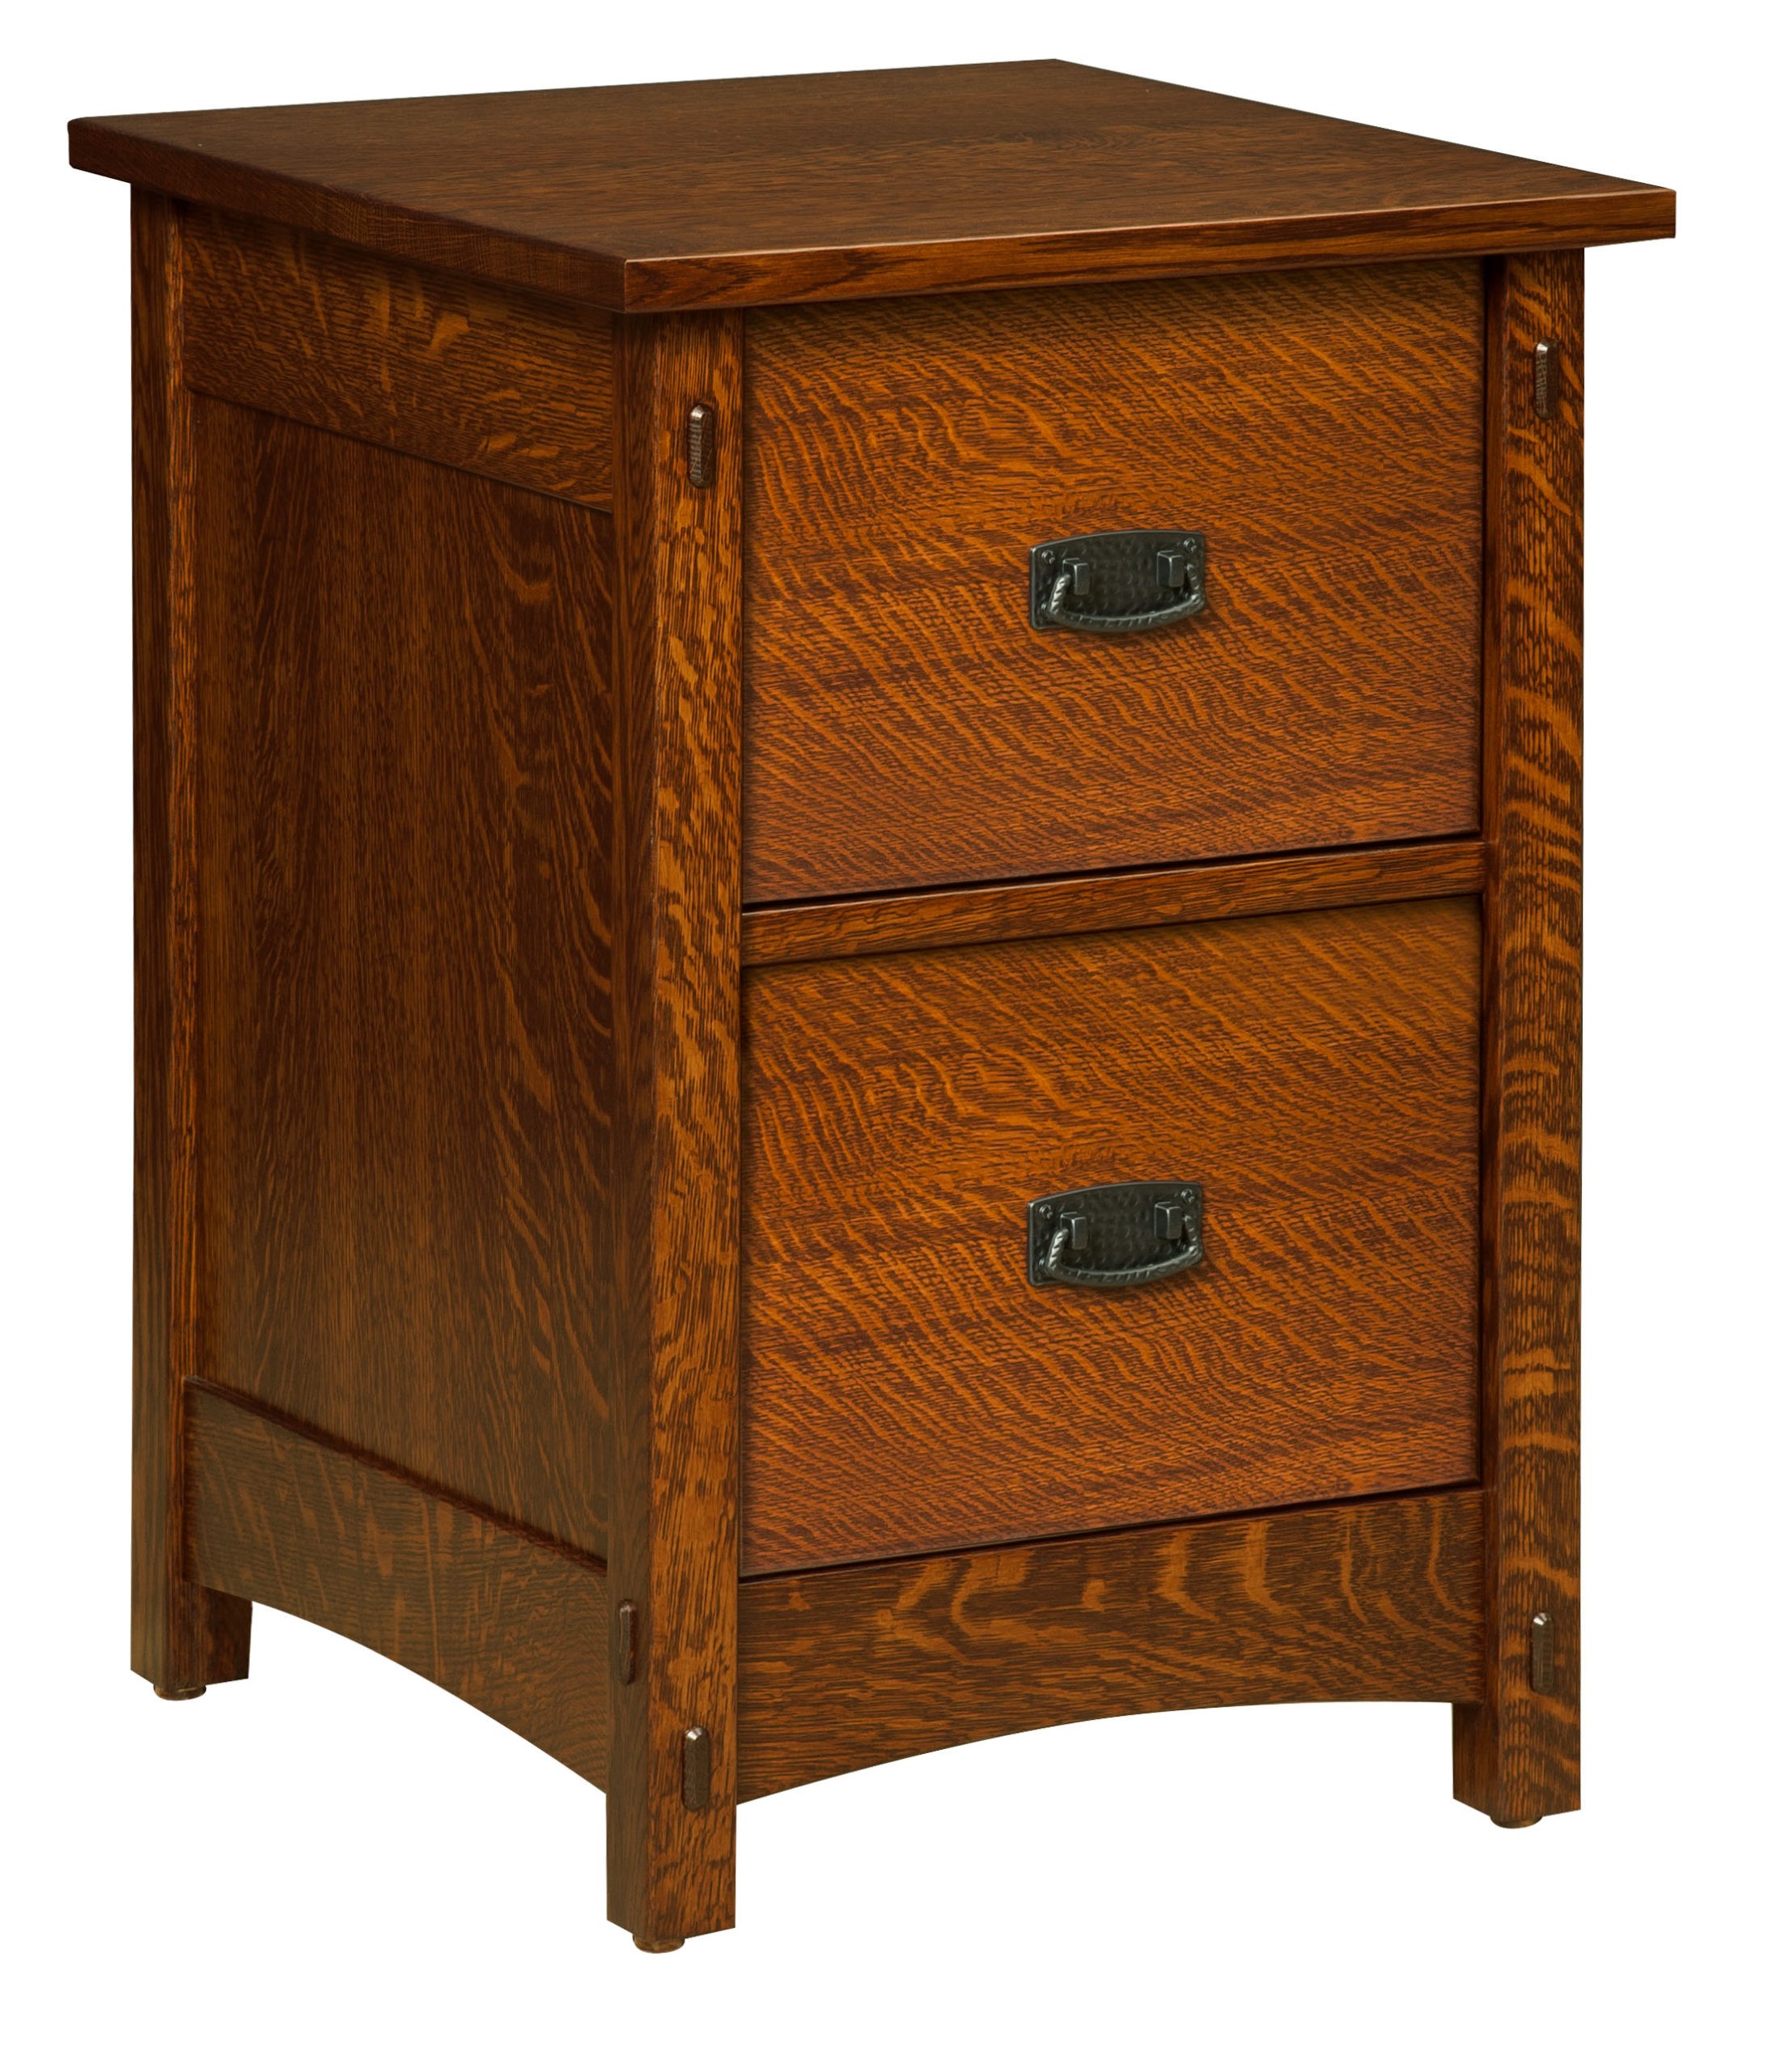 Signature mission filing cabinet amish solid wood file